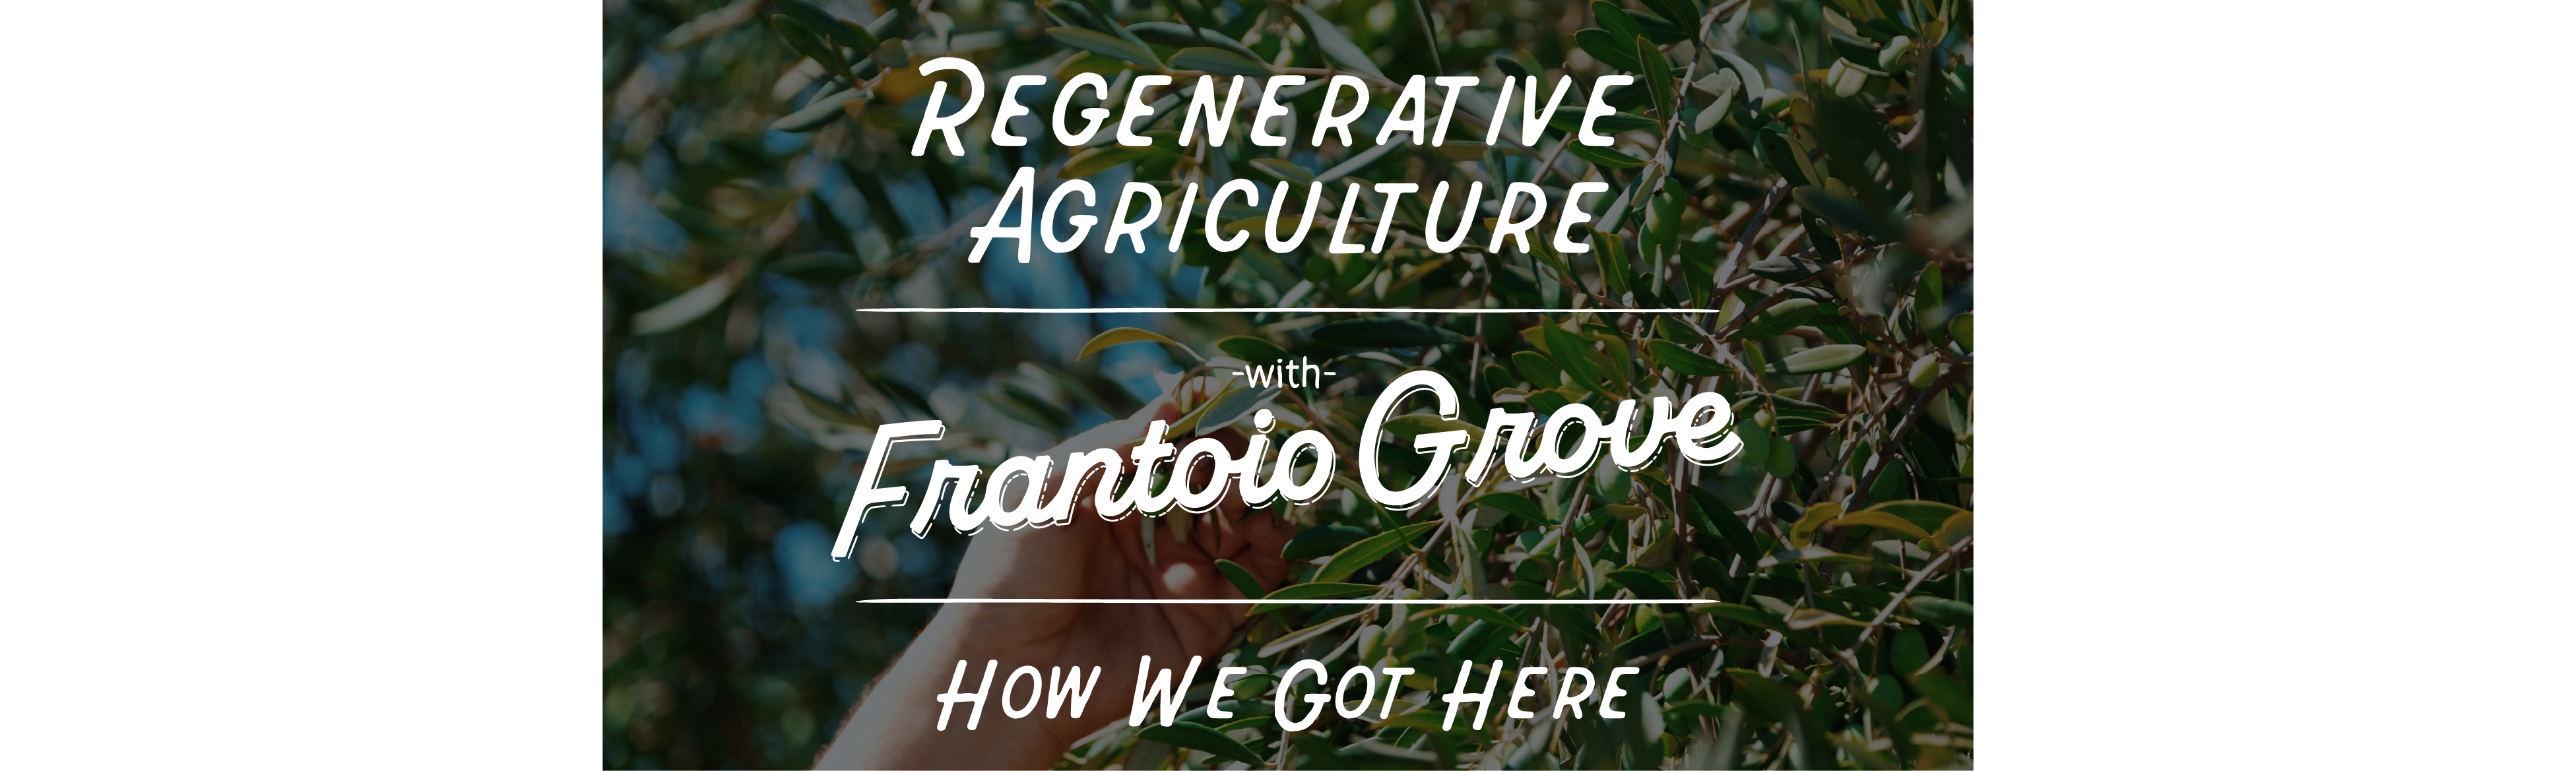 Field Report: Regenerative Agriculture: How we got here